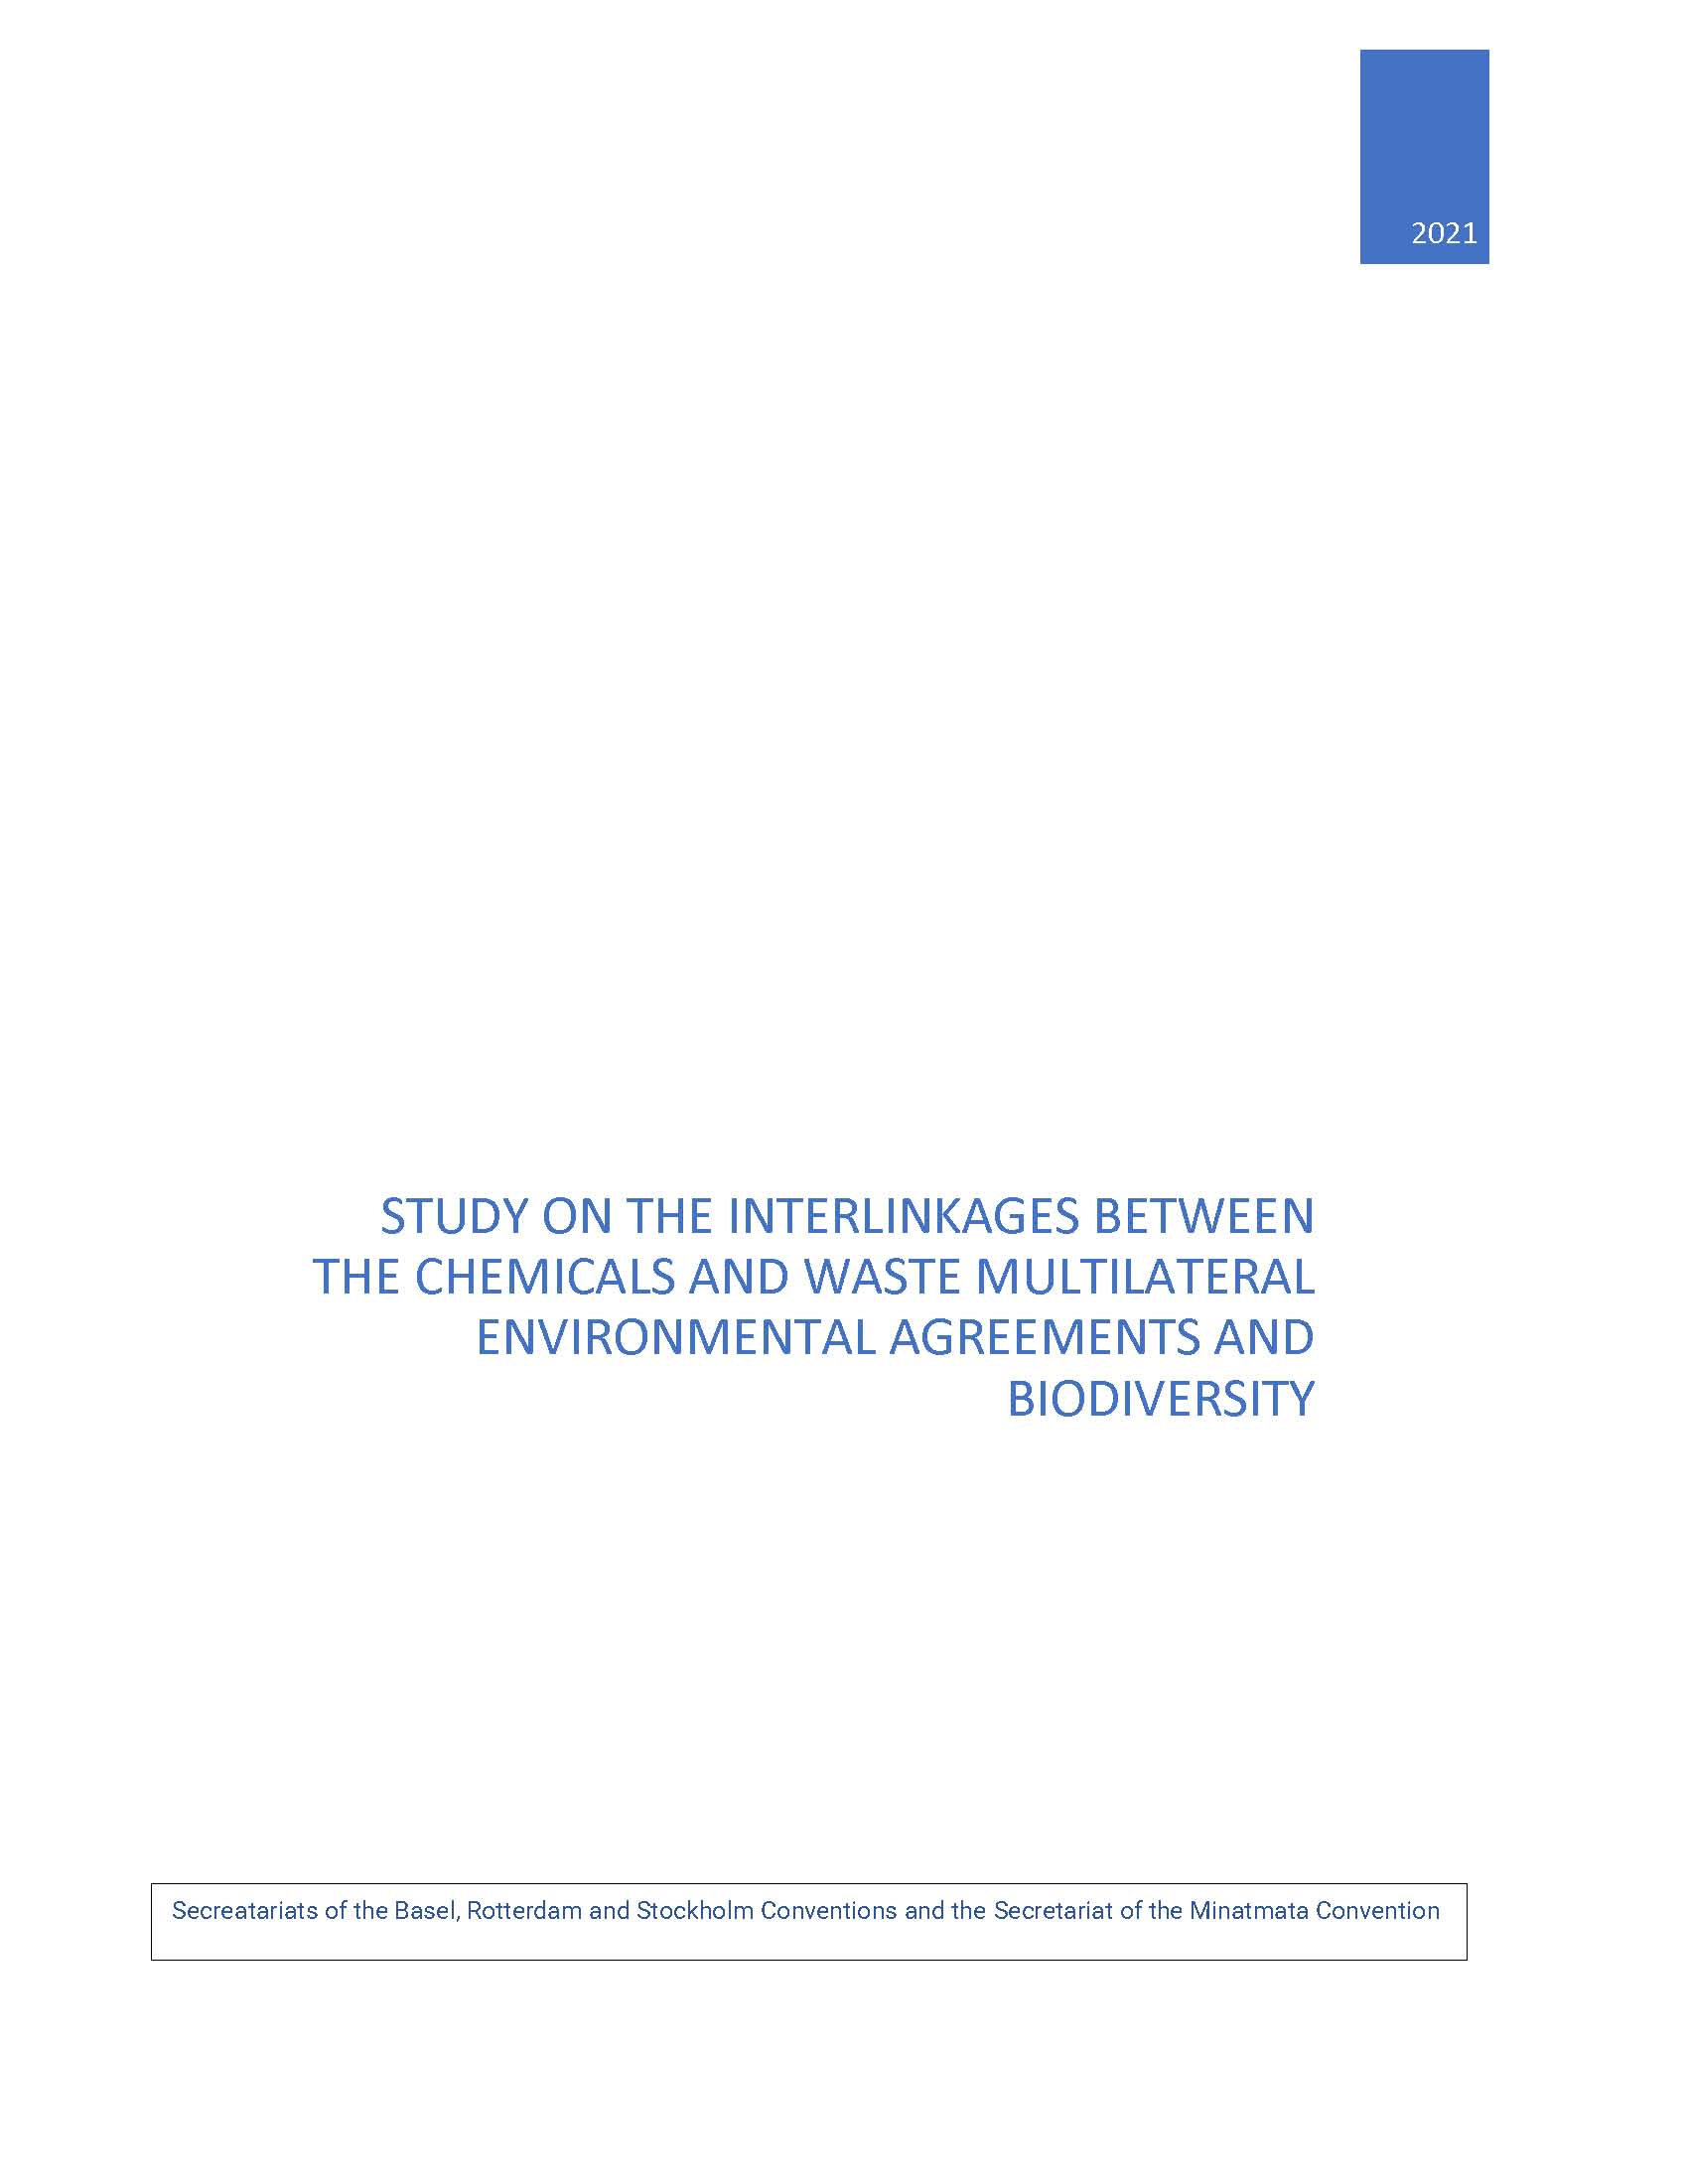 Study on the interlinkages between the chemicals and waste multilateral environmental agreements and biodiversity